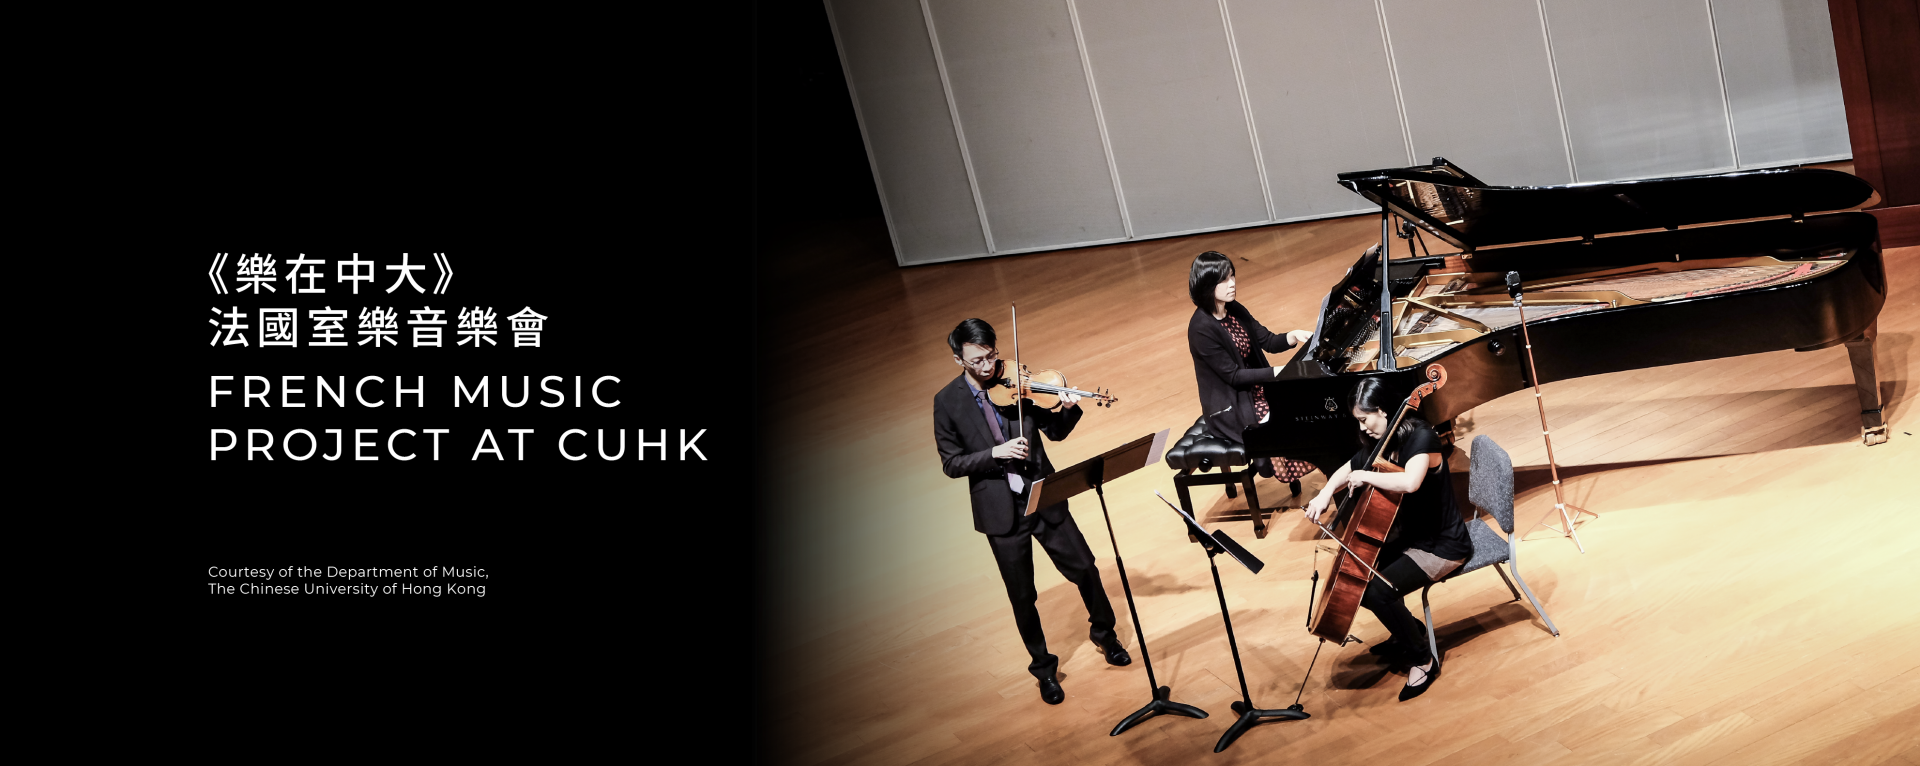 French Music Project at CUHK